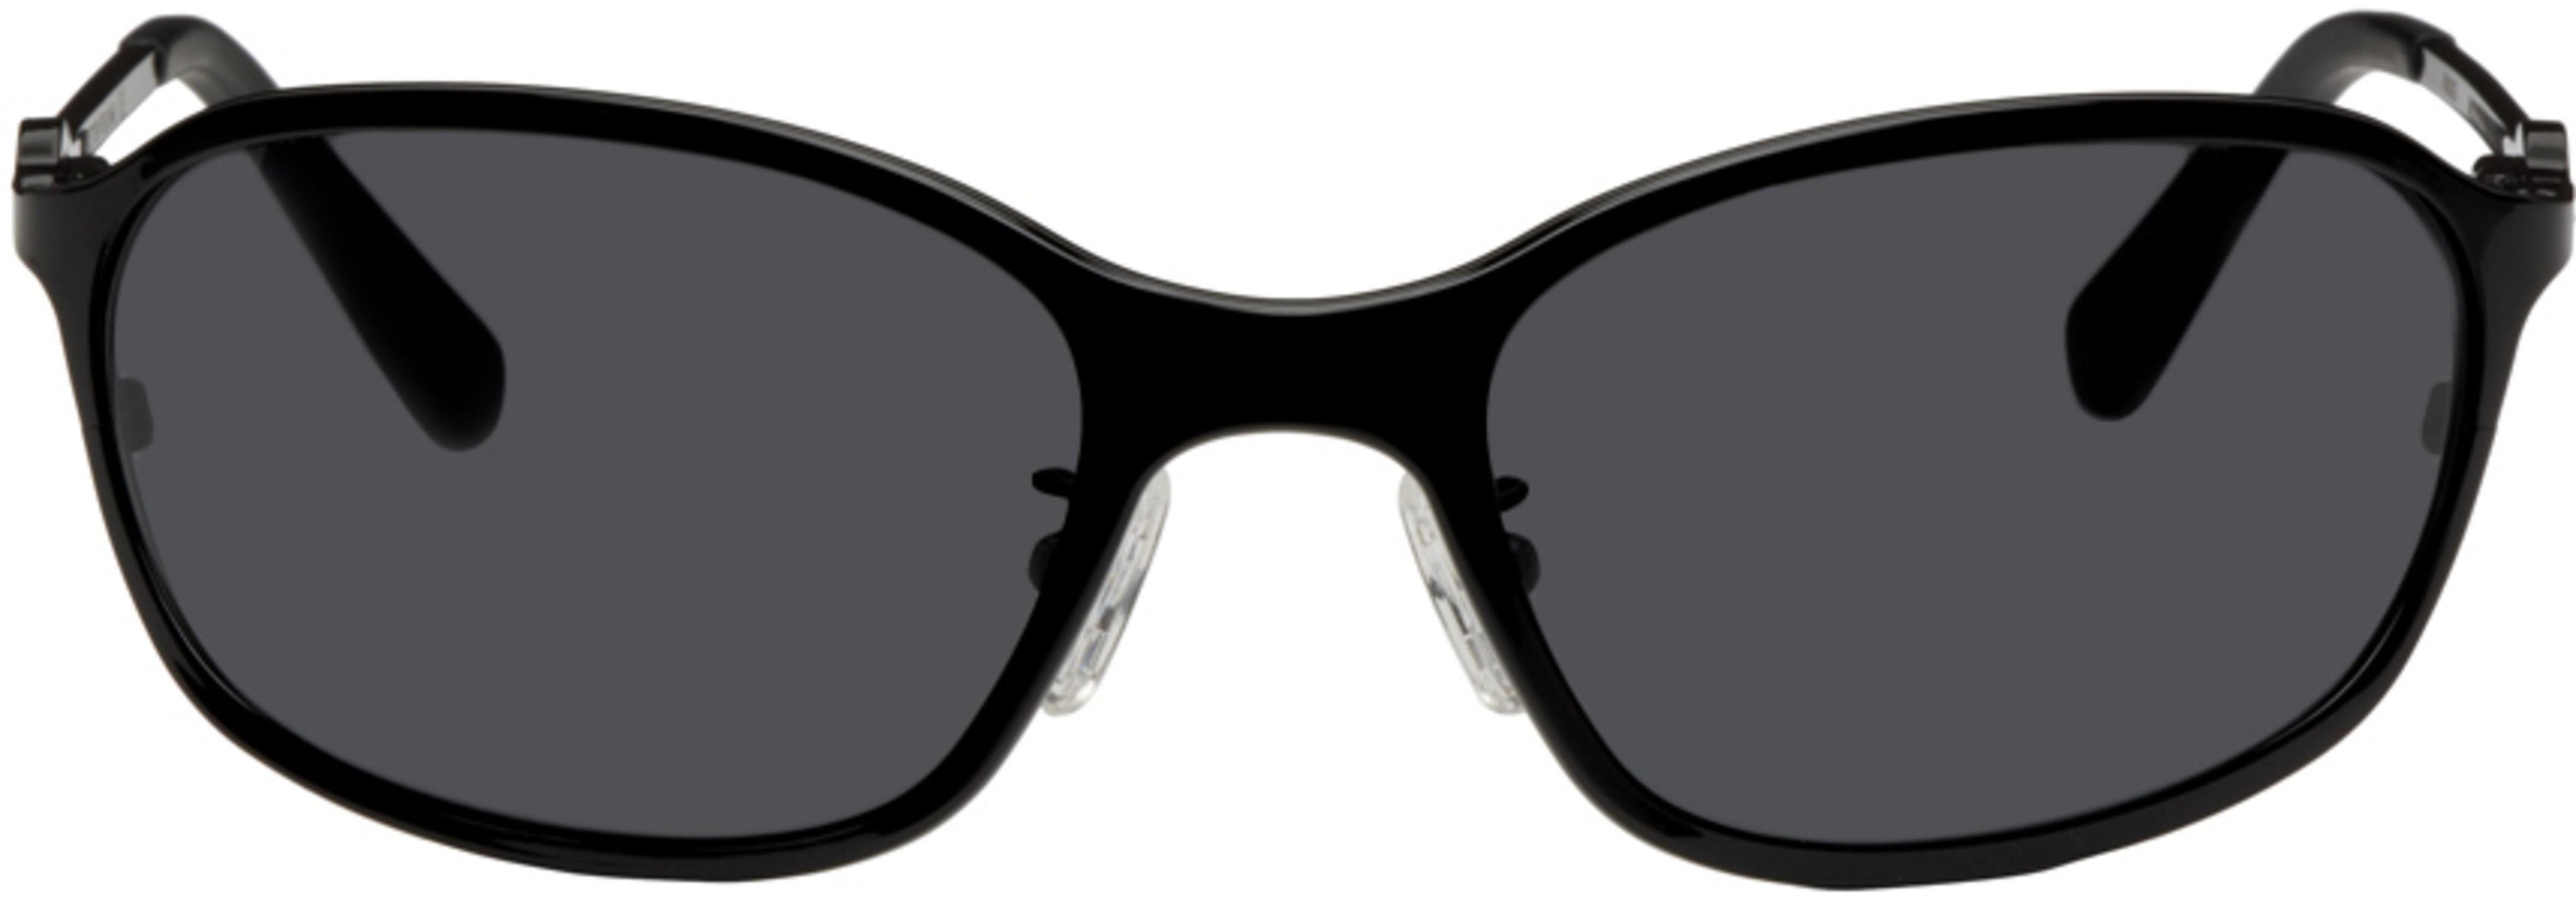 Black Pax Sunglasses by A BETTER FEELING